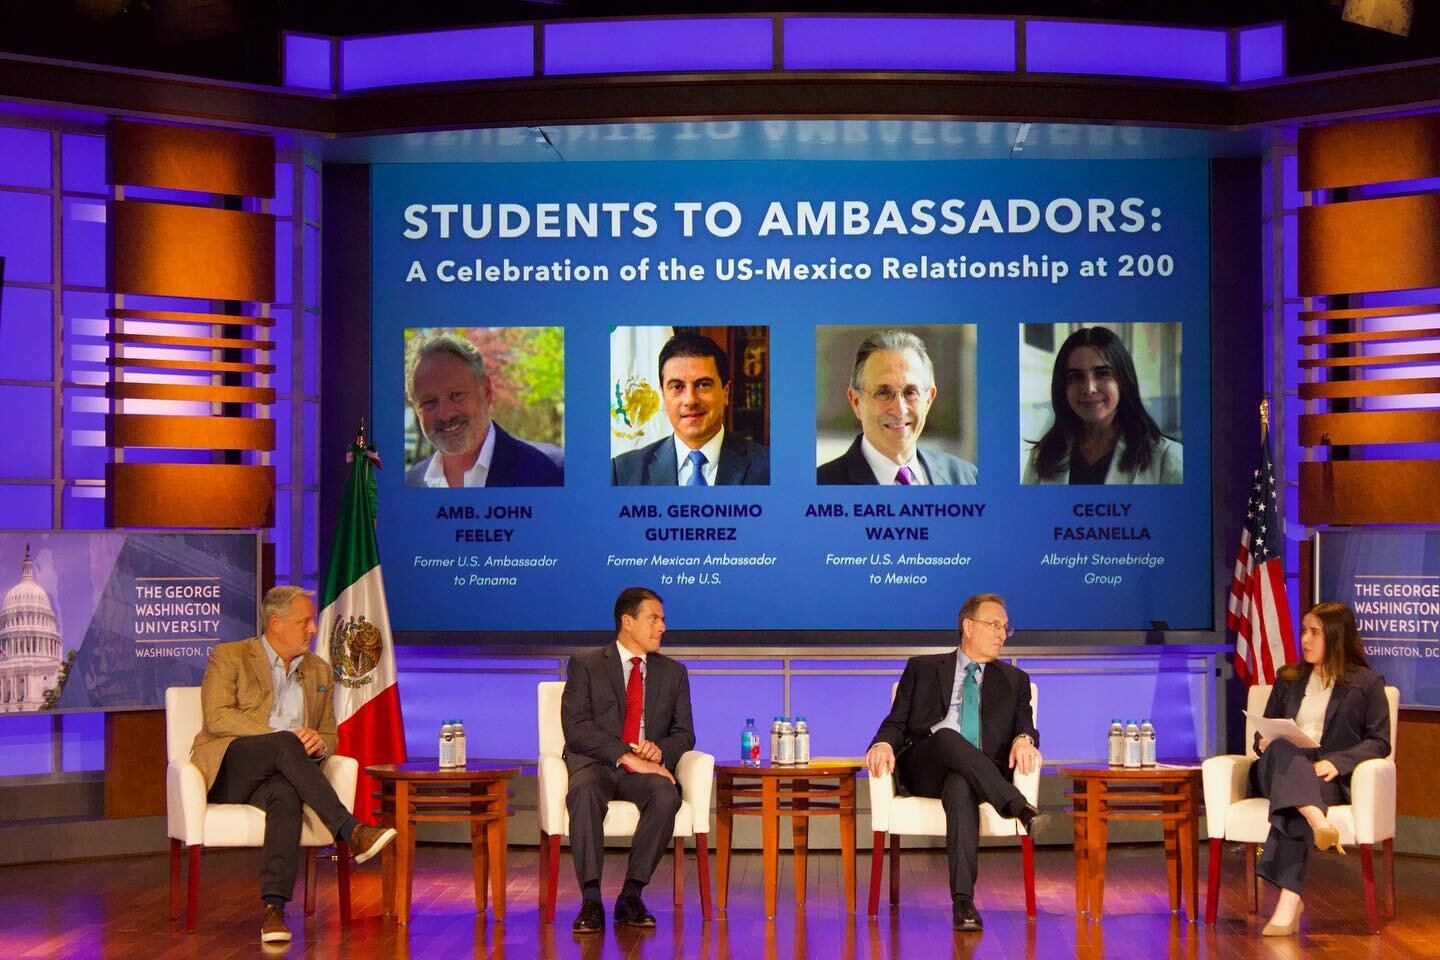 We are thrilled that Onero&rsquo;s &ldquo;Students to Ambassadors- A Celebration of the U.S-Mexico Relationship at 200&rdquo; event was a massive success! 

The panels held an incredible discussion about the nature of the U.S.-Mexico relationship and